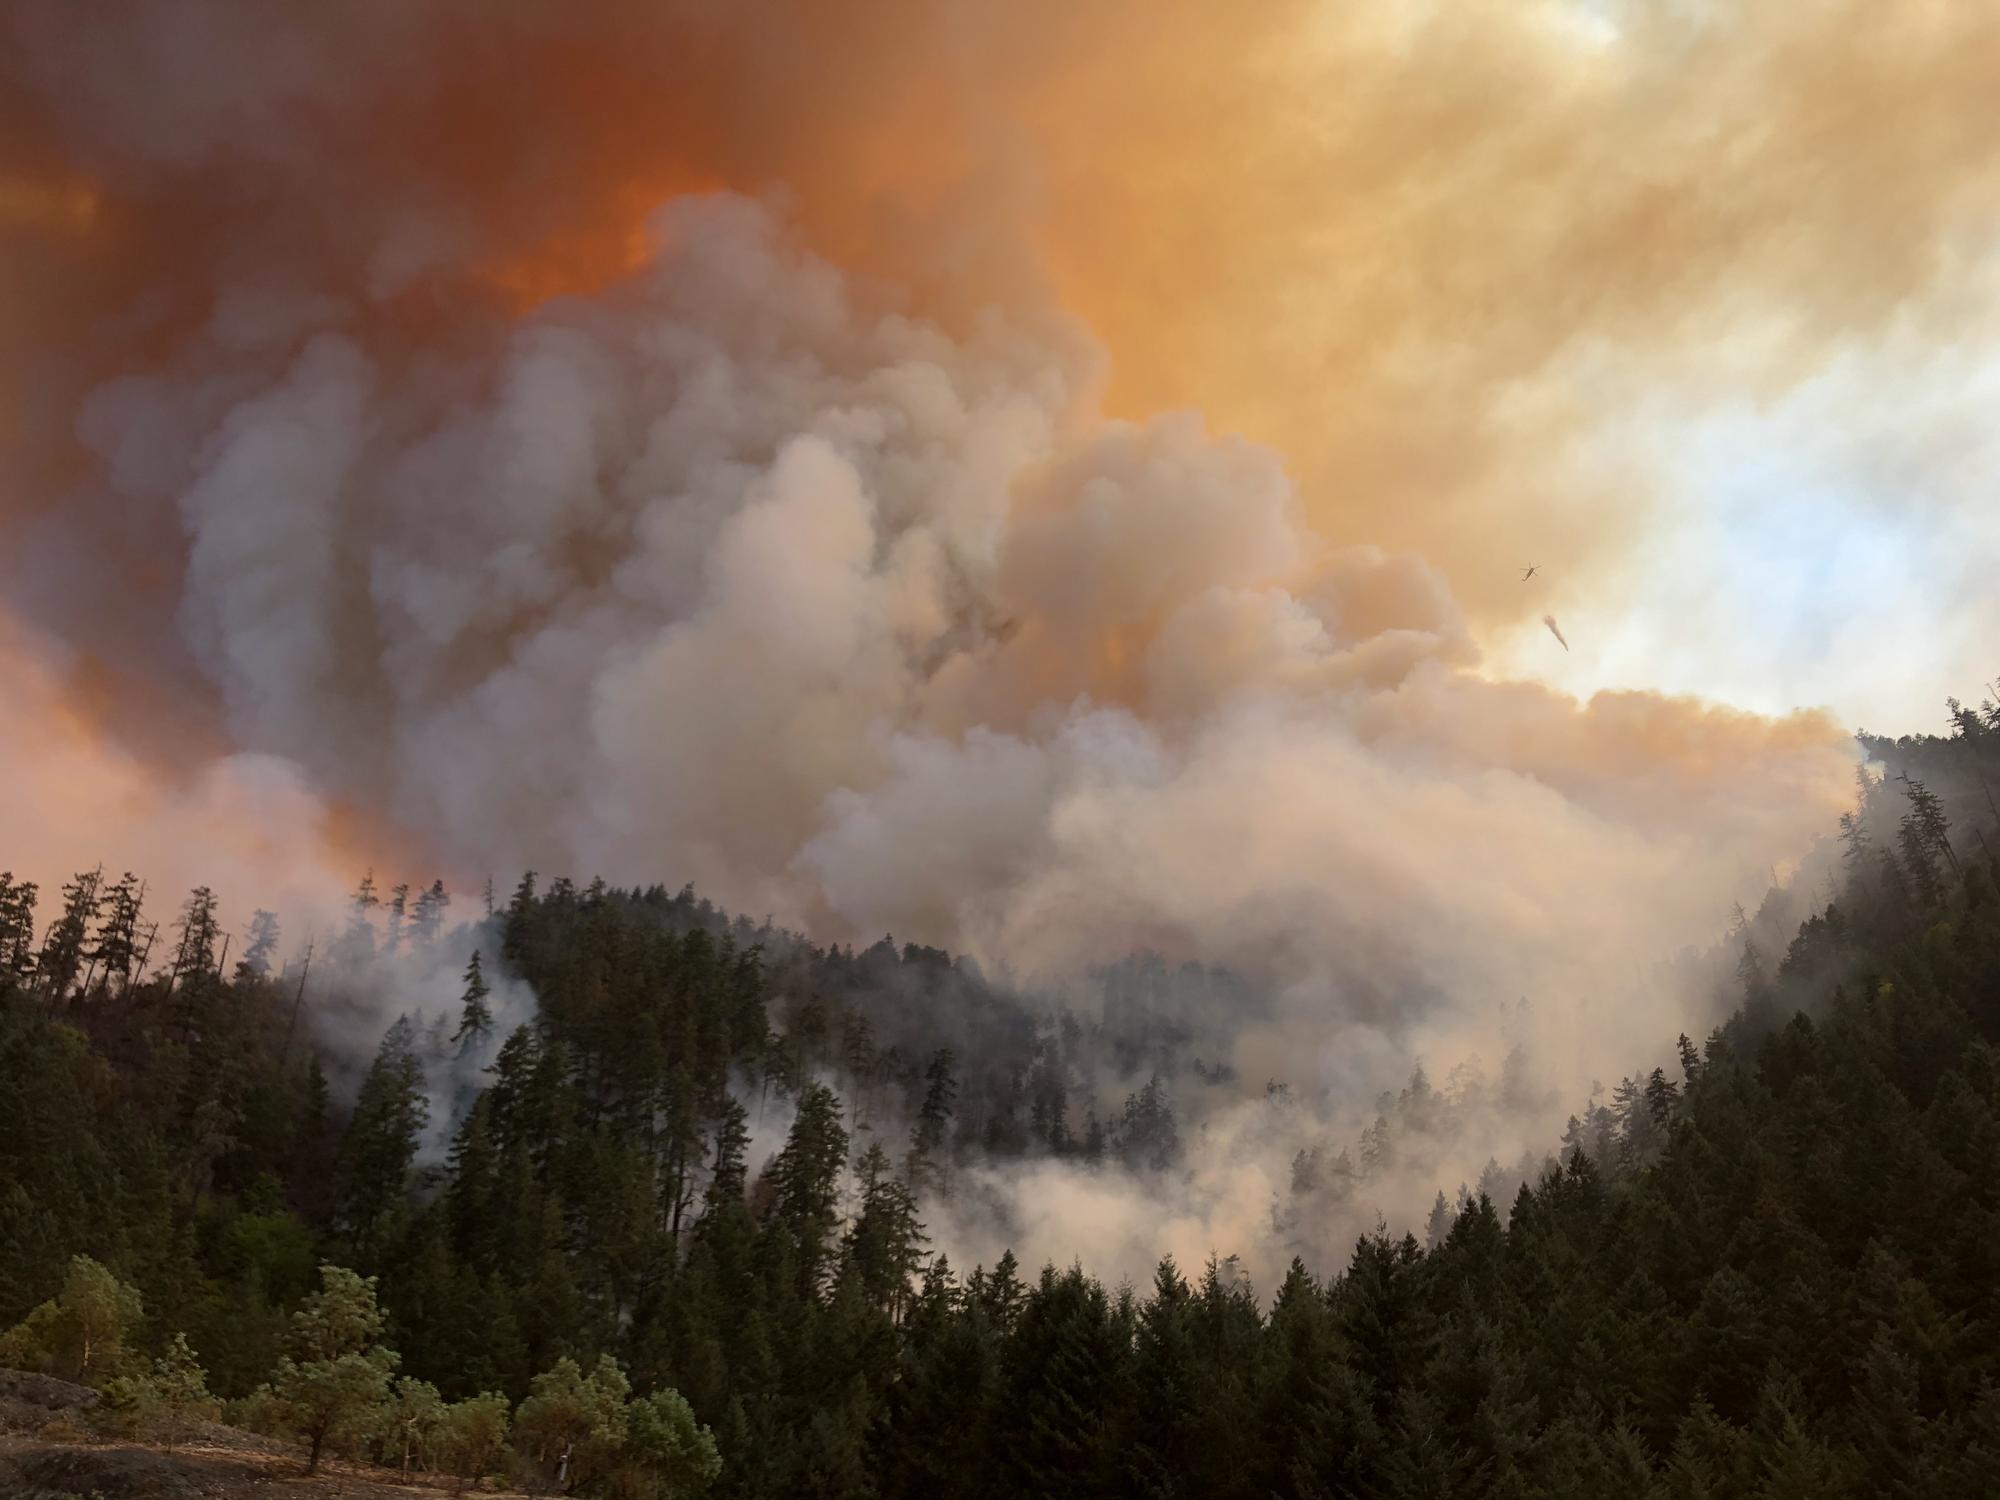 Smoke rises from a wildfire in a heavily forested, mountainous area.